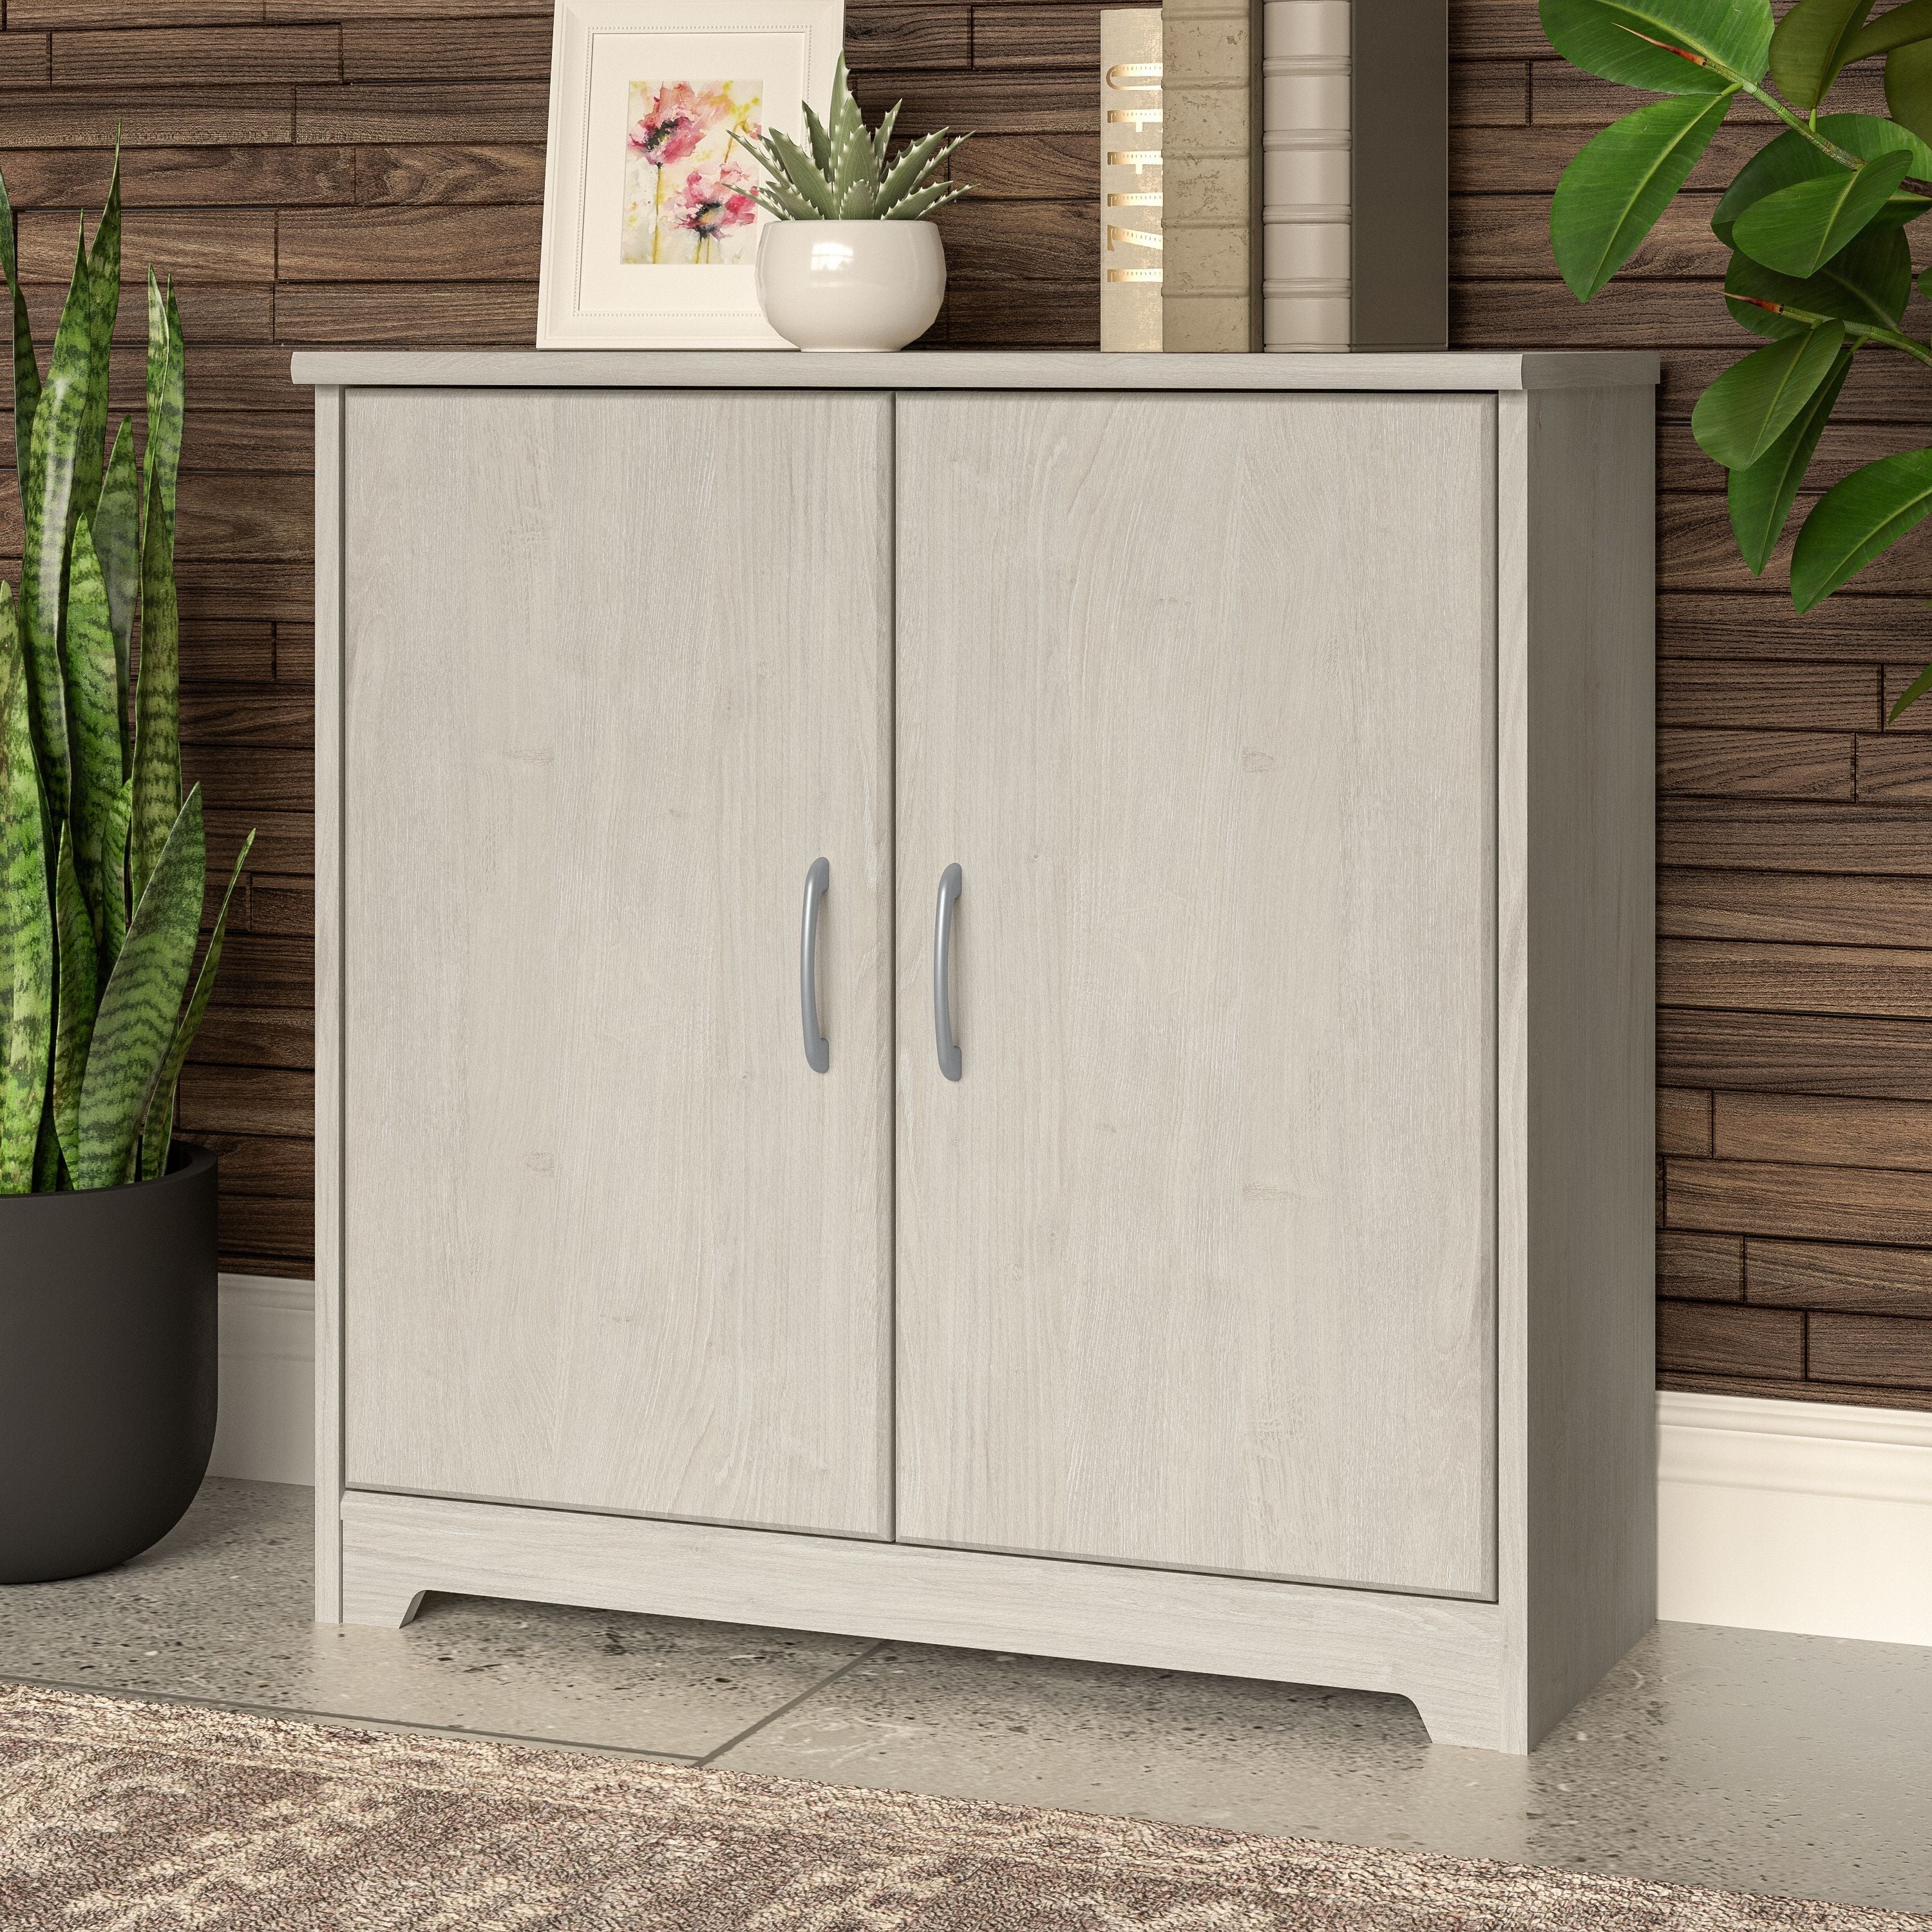 https://ak1.ostkcdn.com/images/products/is/images/direct/31429d9aaefc20aab6a076d9ea4d7d35d0ed1c36/Bush-Furniture-Cabot-Small-Storage-Cabinet-with-Doors.jpg